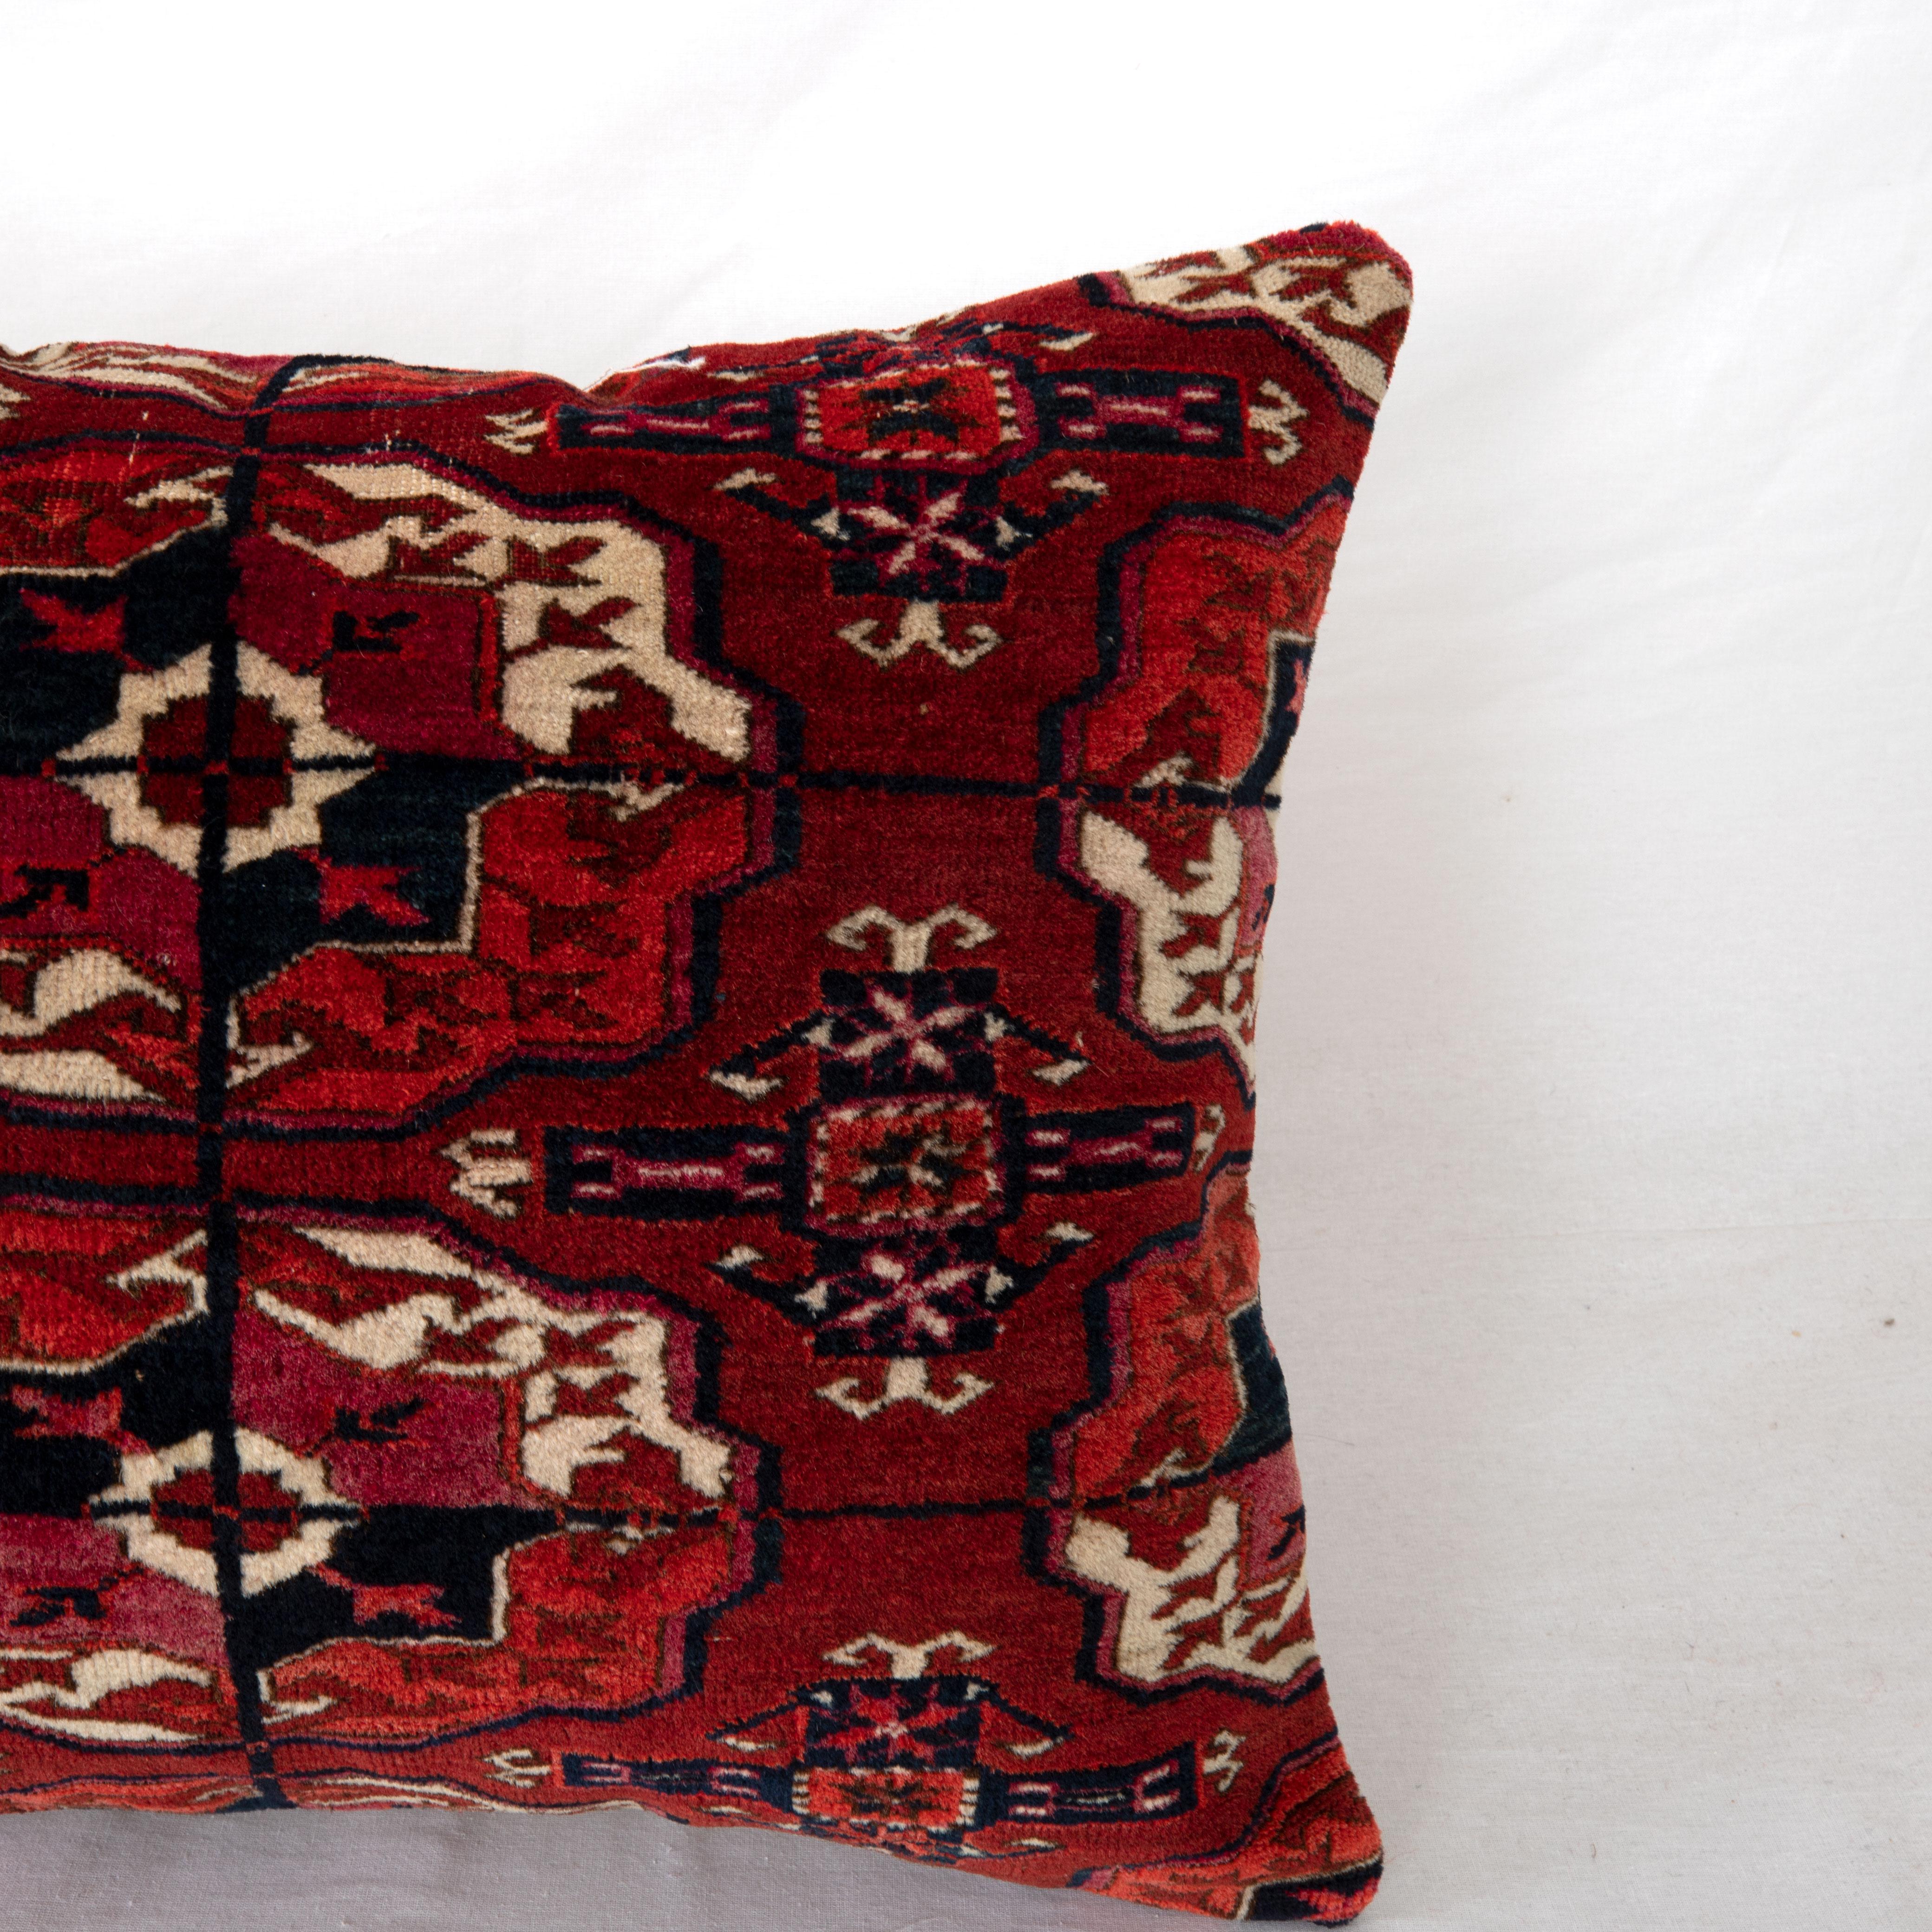 Hand-Woven Antique Rug Pillowcase Made from a Late 19th C. Turkmen Tekke Tribe Rug Fragment